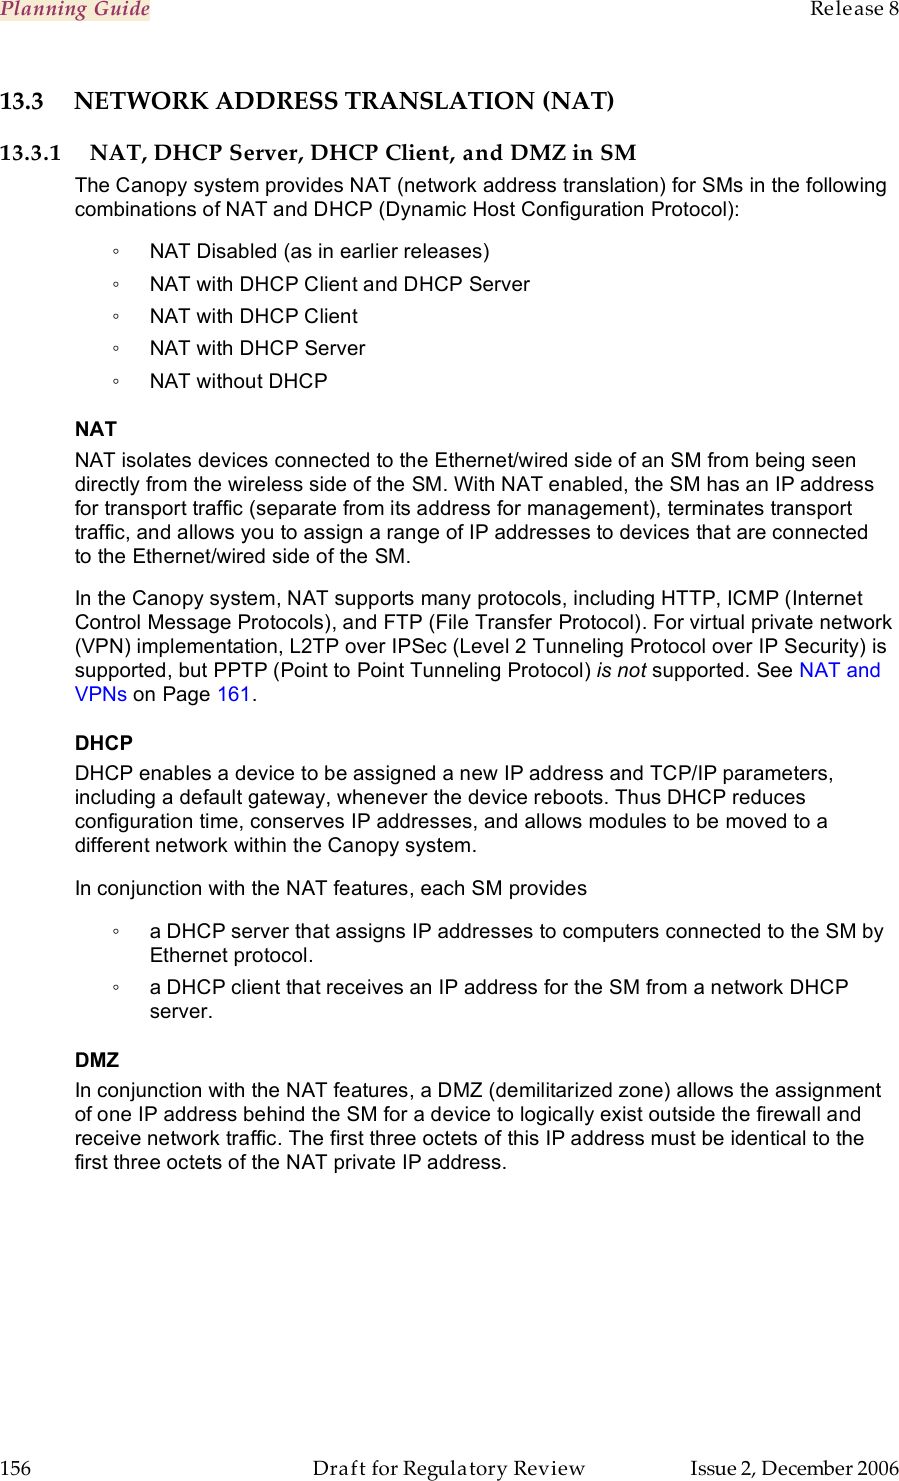 Planning Guide    Release 8   156  Draft for Regulatory Review  Issue 2, December 2006 13.3  NETWORK ADDRESS TRANSLATION (NAT) 13.3.1 NAT, DHCP Server, DHCP Client, and DMZ in SM The Canopy system provides NAT (network address translation) for SMs in the following combinations of NAT and DHCP (Dynamic Host Configuration Protocol): ◦  NAT Disabled (as in earlier releases) ◦  NAT with DHCP Client and DHCP Server ◦  NAT with DHCP Client ◦  NAT with DHCP Server ◦  NAT without DHCP NAT NAT isolates devices connected to the Ethernet/wired side of an SM from being seen directly from the wireless side of the SM. With NAT enabled, the SM has an IP address for transport traffic (separate from its address for management), terminates transport traffic, and allows you to assign a range of IP addresses to devices that are connected to the Ethernet/wired side of the SM.  In the Canopy system, NAT supports many protocols, including HTTP, ICMP (Internet Control Message Protocols), and FTP (File Transfer Protocol). For virtual private network (VPN) implementation, L2TP over IPSec (Level 2 Tunneling Protocol over IP Security) is supported, but PPTP (Point to Point Tunneling Protocol) is not supported. See NAT and VPNs on Page 161. DHCP DHCP enables a device to be assigned a new IP address and TCP/IP parameters, including a default gateway, whenever the device reboots. Thus DHCP reduces configuration time, conserves IP addresses, and allows modules to be moved to a different network within the Canopy system. In conjunction with the NAT features, each SM provides ◦  a DHCP server that assigns IP addresses to computers connected to the SM by Ethernet protocol. ◦  a DHCP client that receives an IP address for the SM from a network DHCP server. DMZ In conjunction with the NAT features, a DMZ (demilitarized zone) allows the assignment of one IP address behind the SM for a device to logically exist outside the firewall and receive network traffic. The first three octets of this IP address must be identical to the first three octets of the NAT private IP address. 